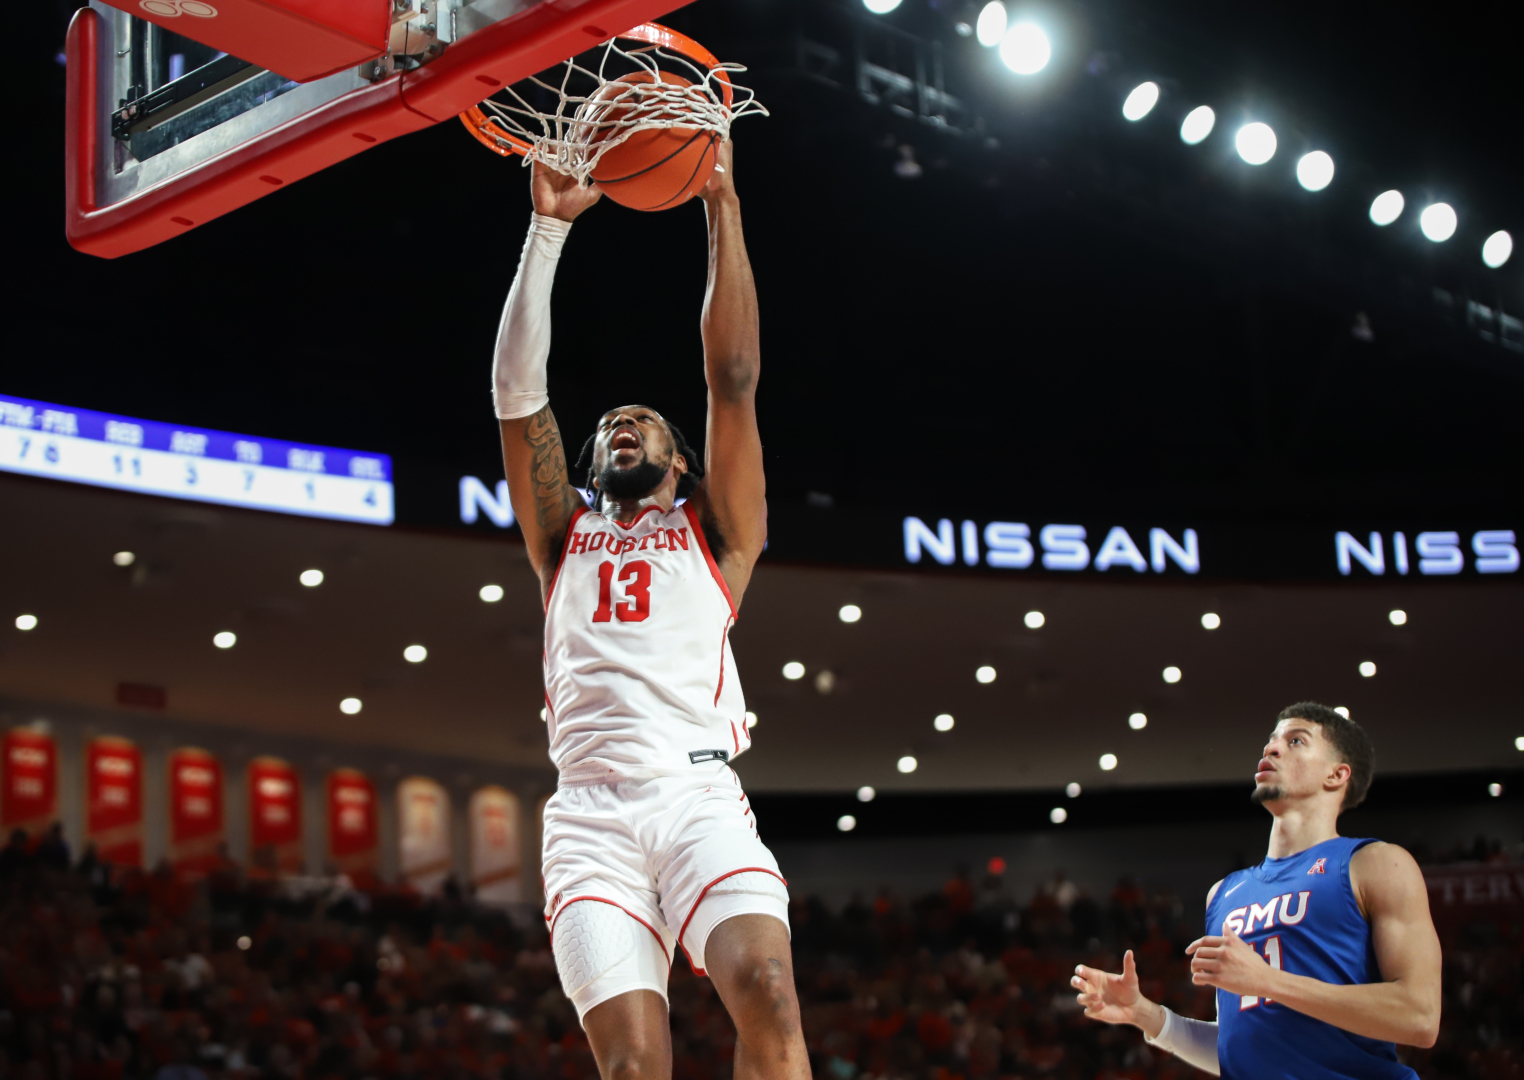 J'Wan Roberts had 10 points within the first 10 minutes of No. 1 UH's win over Tulane on Tuesday night in New Orleans. | Anh Le/The Cougar